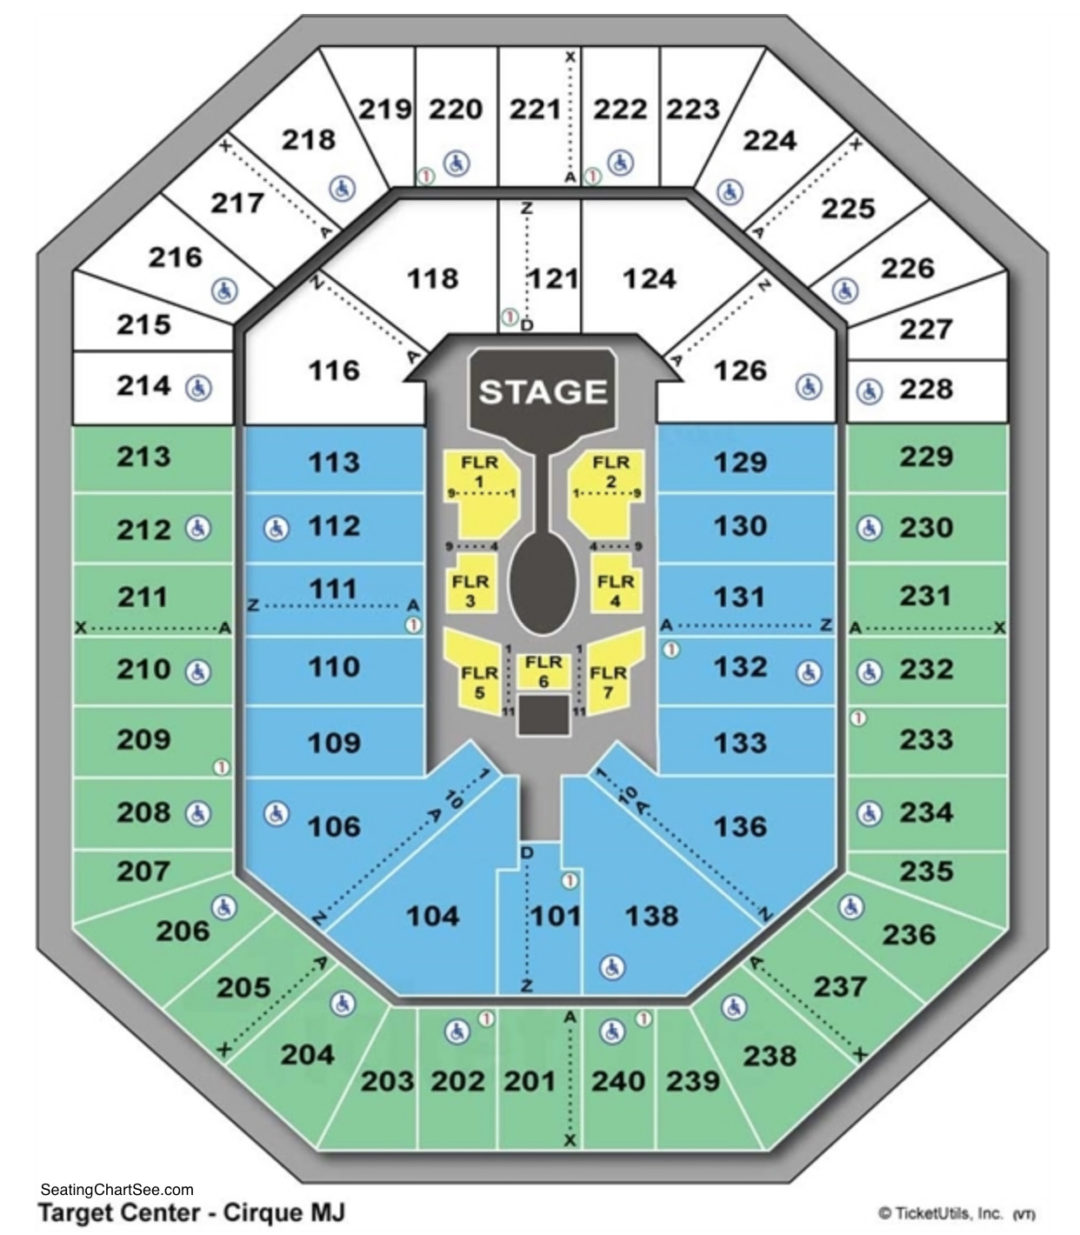 Barclayscenter Com Seating Chart